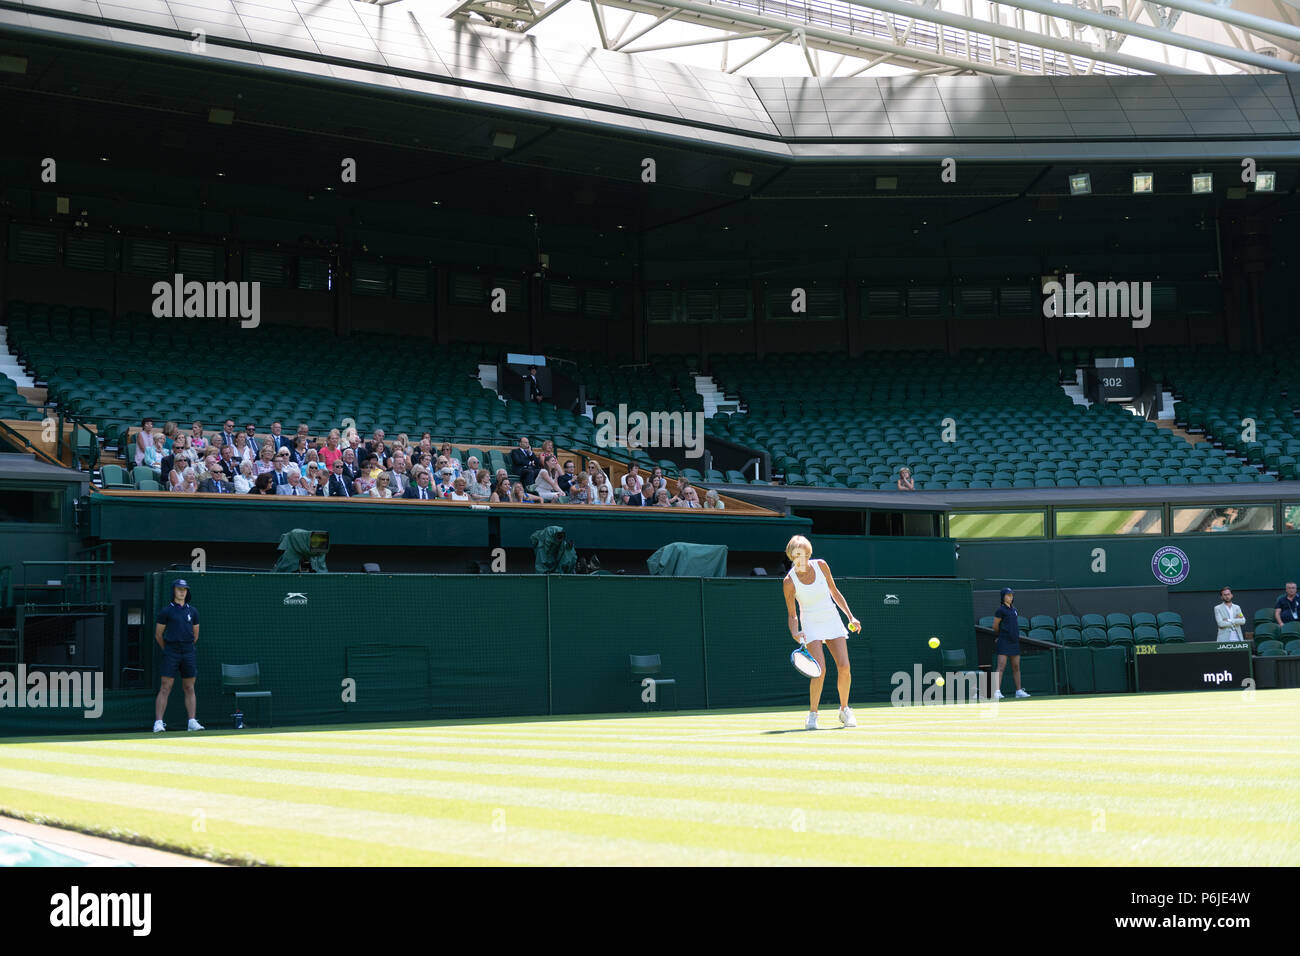 London, UK. 30 June 2018.  The Wimbledon Tennis Championships 2018 held at The All England Lawn Tennis and Croquet Club, London, England, UK.    Practice Saturday - General View - GV.  In an otherwise empty Centre Court, AELTC Members gather in the Royal Box to watch a Members' Doubles match.  This is to rehearse Royal Box procedures and tamp-down the Court. Credit: Duncan Grove/Alamy Live News Stock Photo